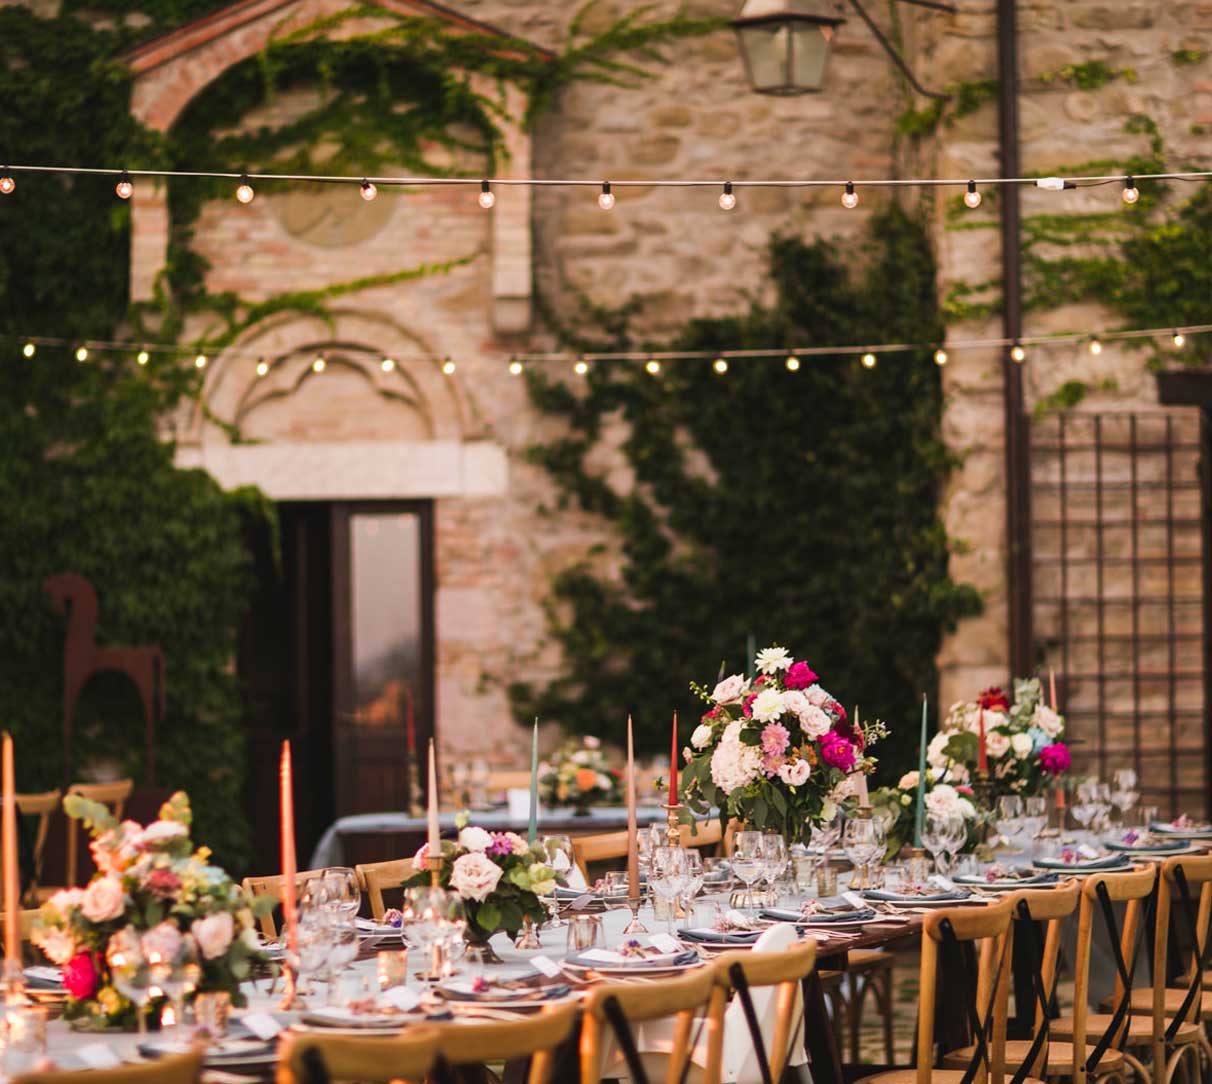 Pink table setting - Gradient of pink - wedding flowers - wedding in Italy